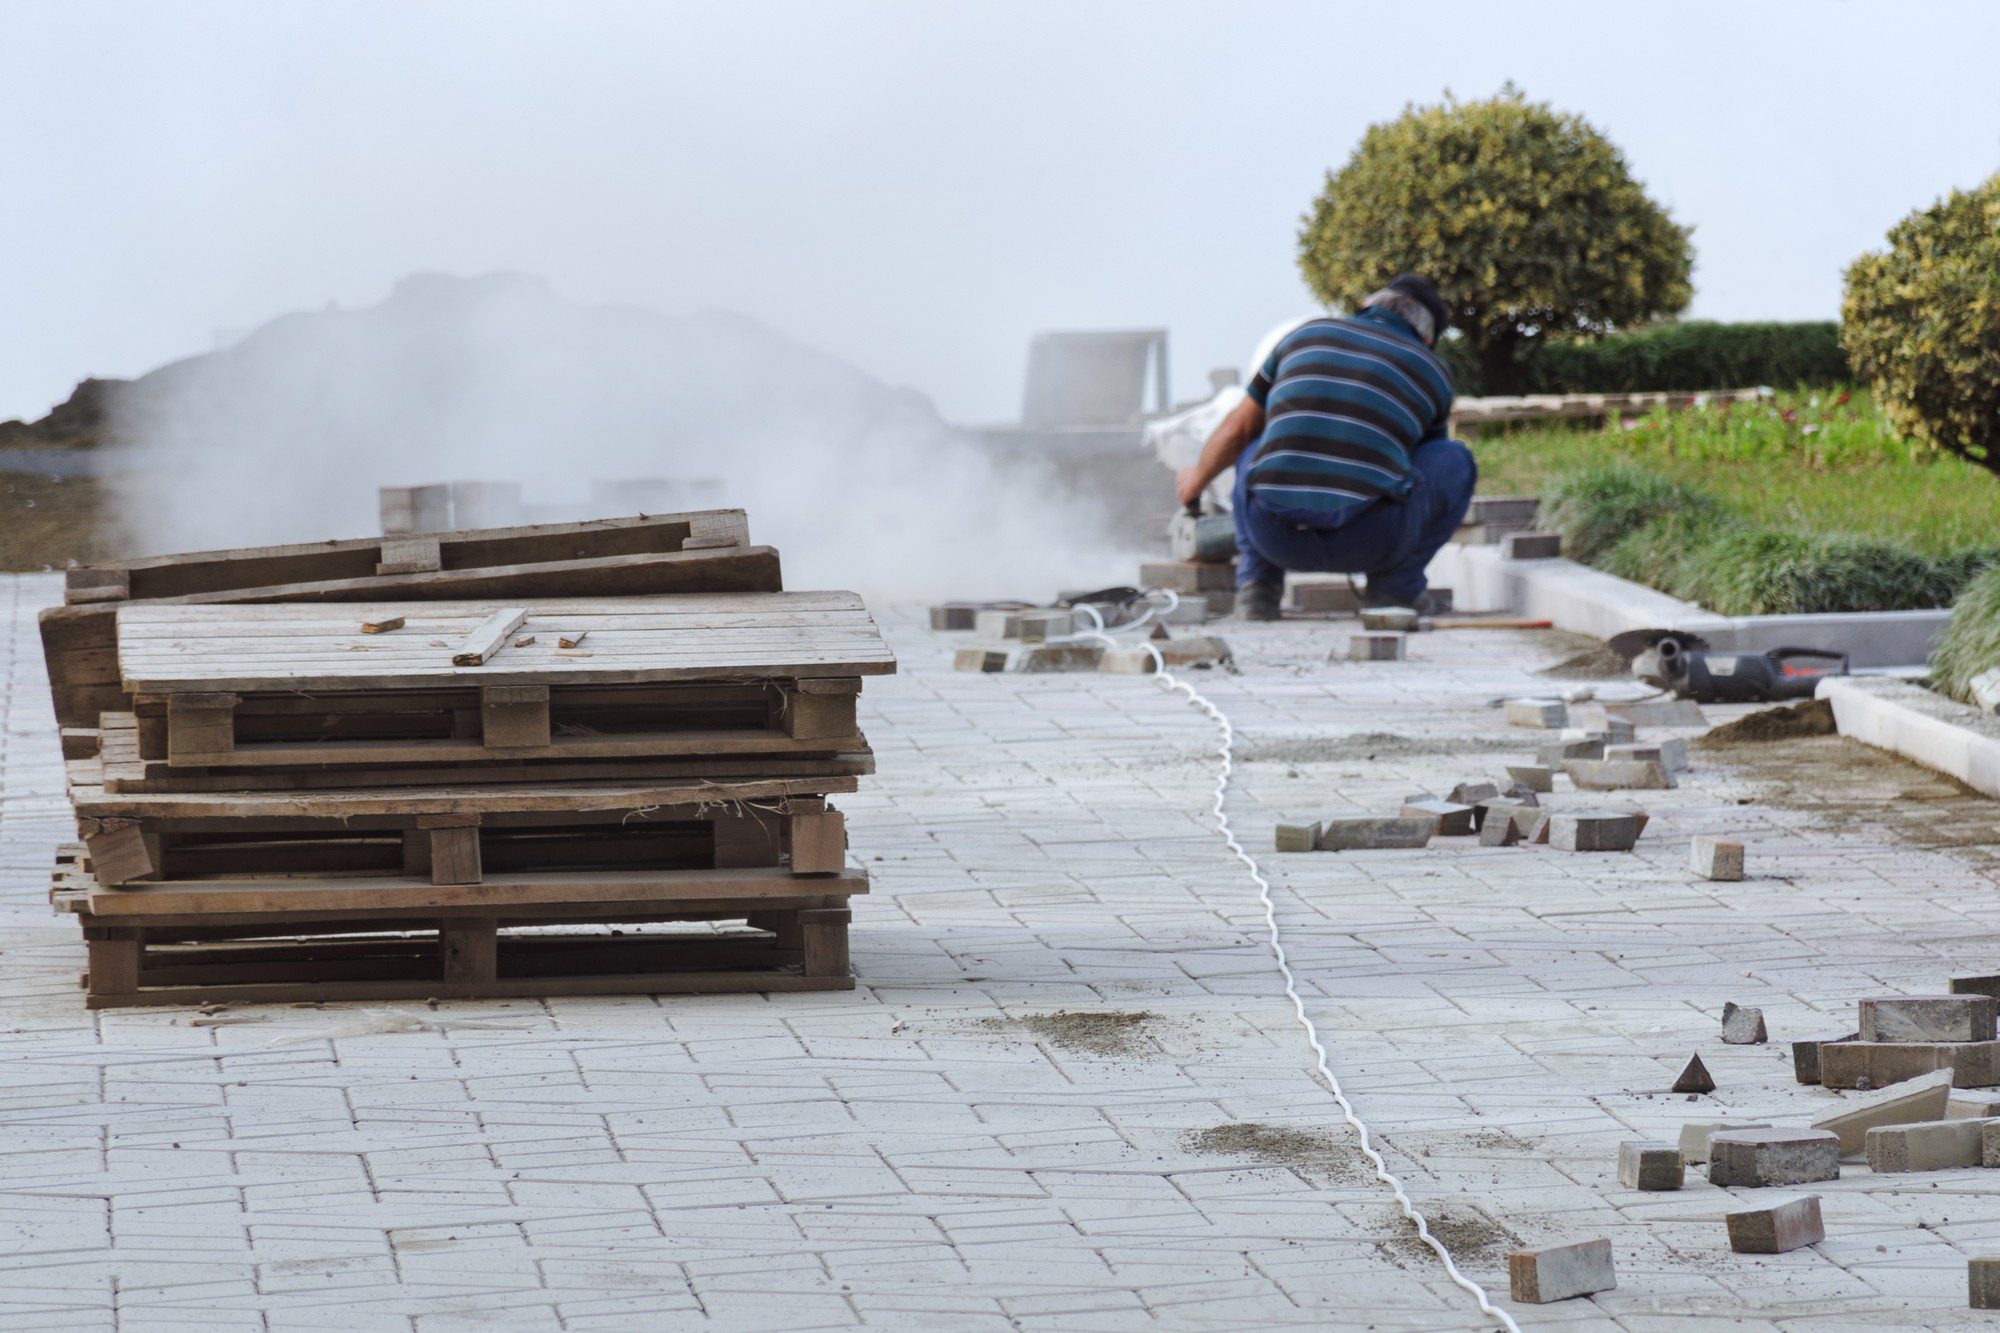 The image shows an outdoor setting with construction or maintenance work taking place. In the foreground, there are several stacked wooden pallets on top of a paved area. The paving stones give the impression that this could be a pedestrian path or patio.In the background, there is a person engaged in some kind of manual labour. This person is crouched over and appears to be handling or working with the paving stones, as suggested by the scattered array of stones and the dust surrounding the area of work. There is construction equipment on the ground next to them, which could be tools or machinery used for cutting or placing the stones.Near the person, white extension cords are visible, trailing across the ground and presumably connected to the equipment being used. The atmosphere seems to be dusty, likely from the work being done on the paving stones.Overall, the scene captures a moment of ongoing construction or improvement work to a paved outdoor area.